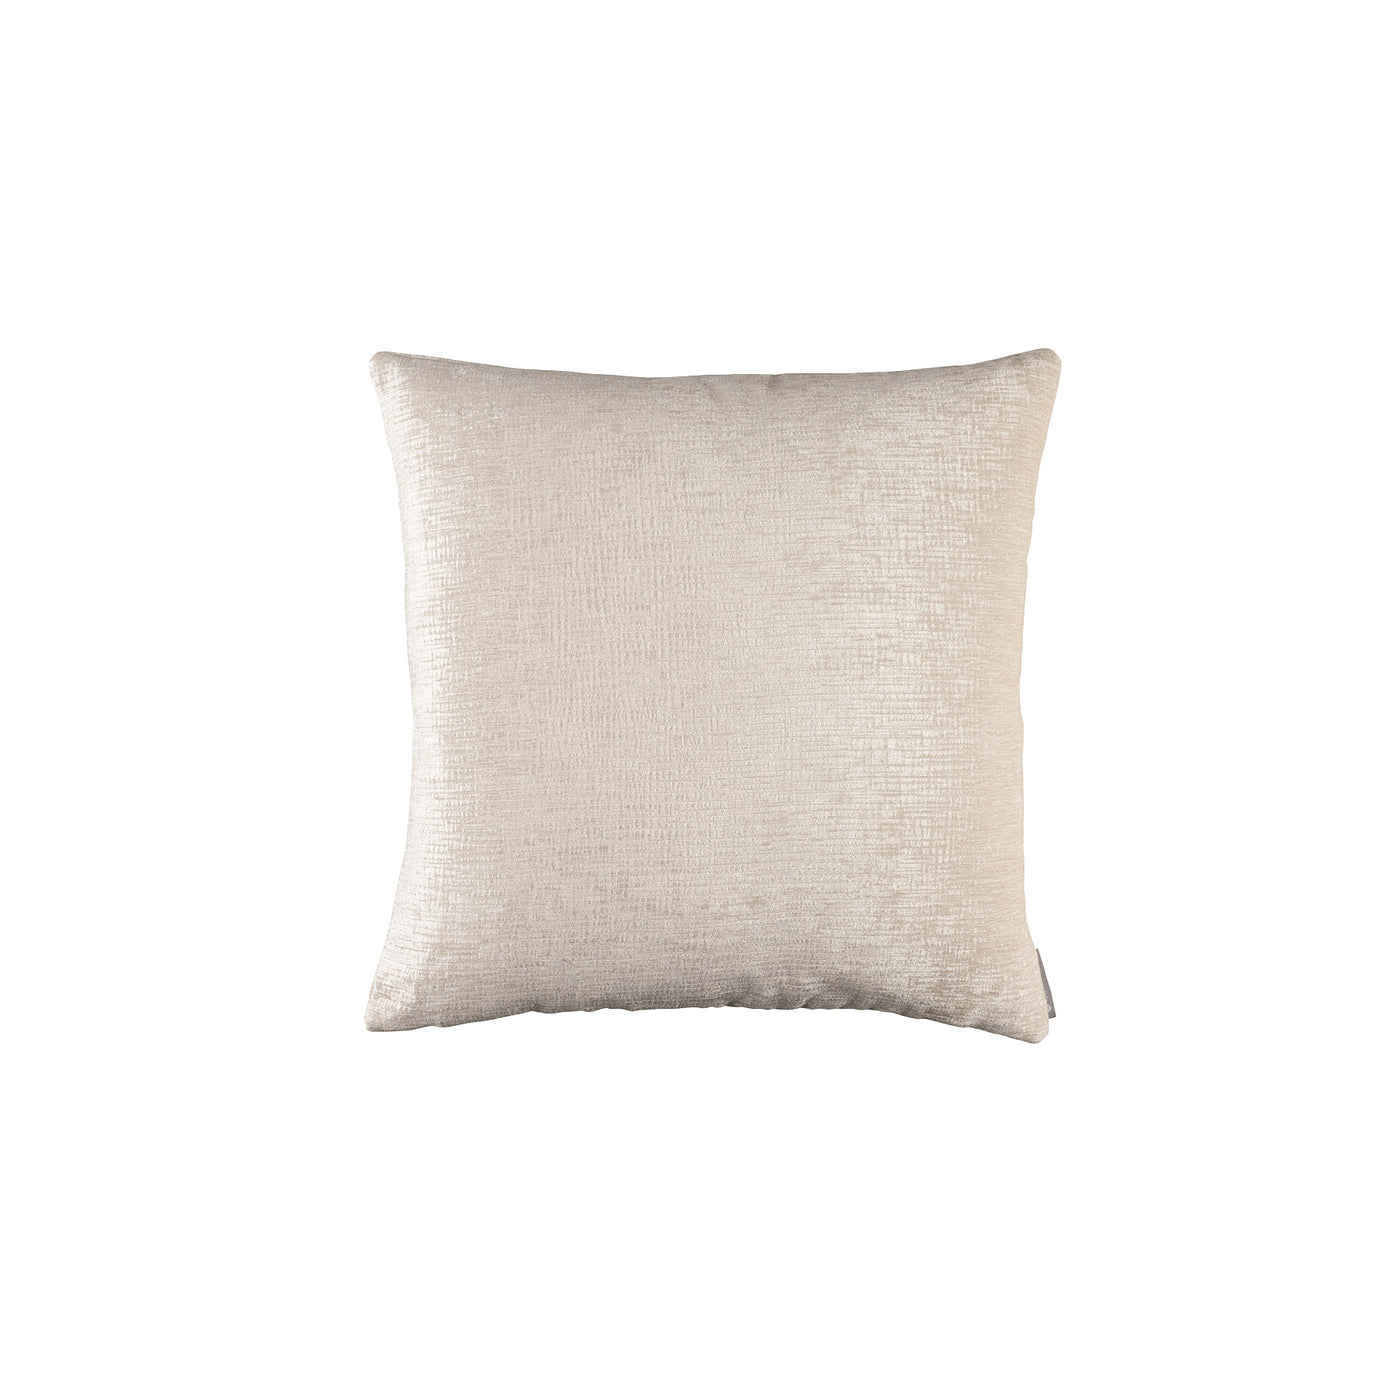 Ava Ivory Large Square Pillow (24x24)